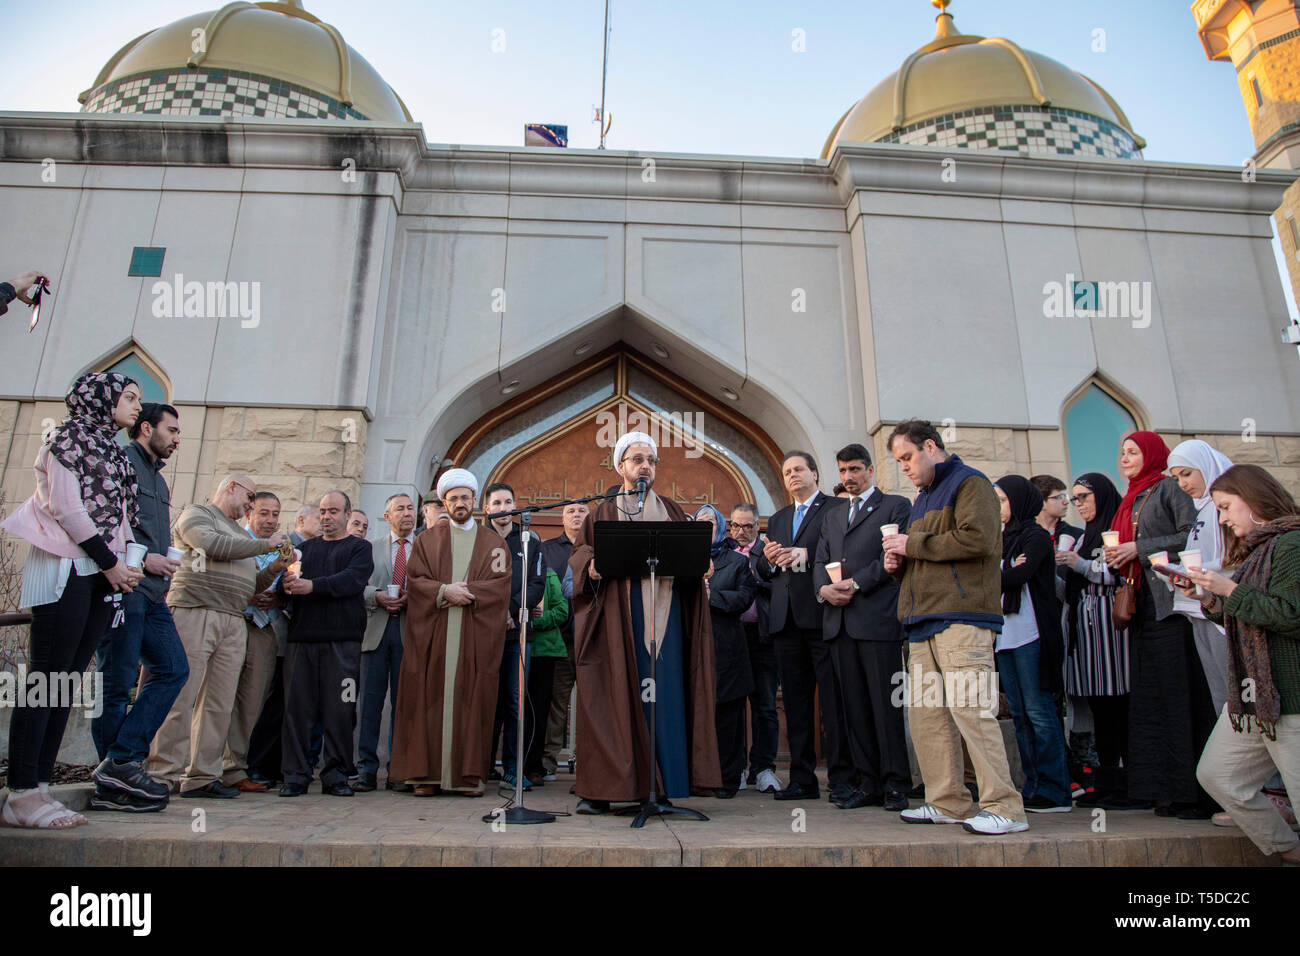 Dearborn, Michigan - Muslims hold a candlelight prayer vigil at the Islamic Center of America in support of the victims of the church bombings in Sri  Stock Photo